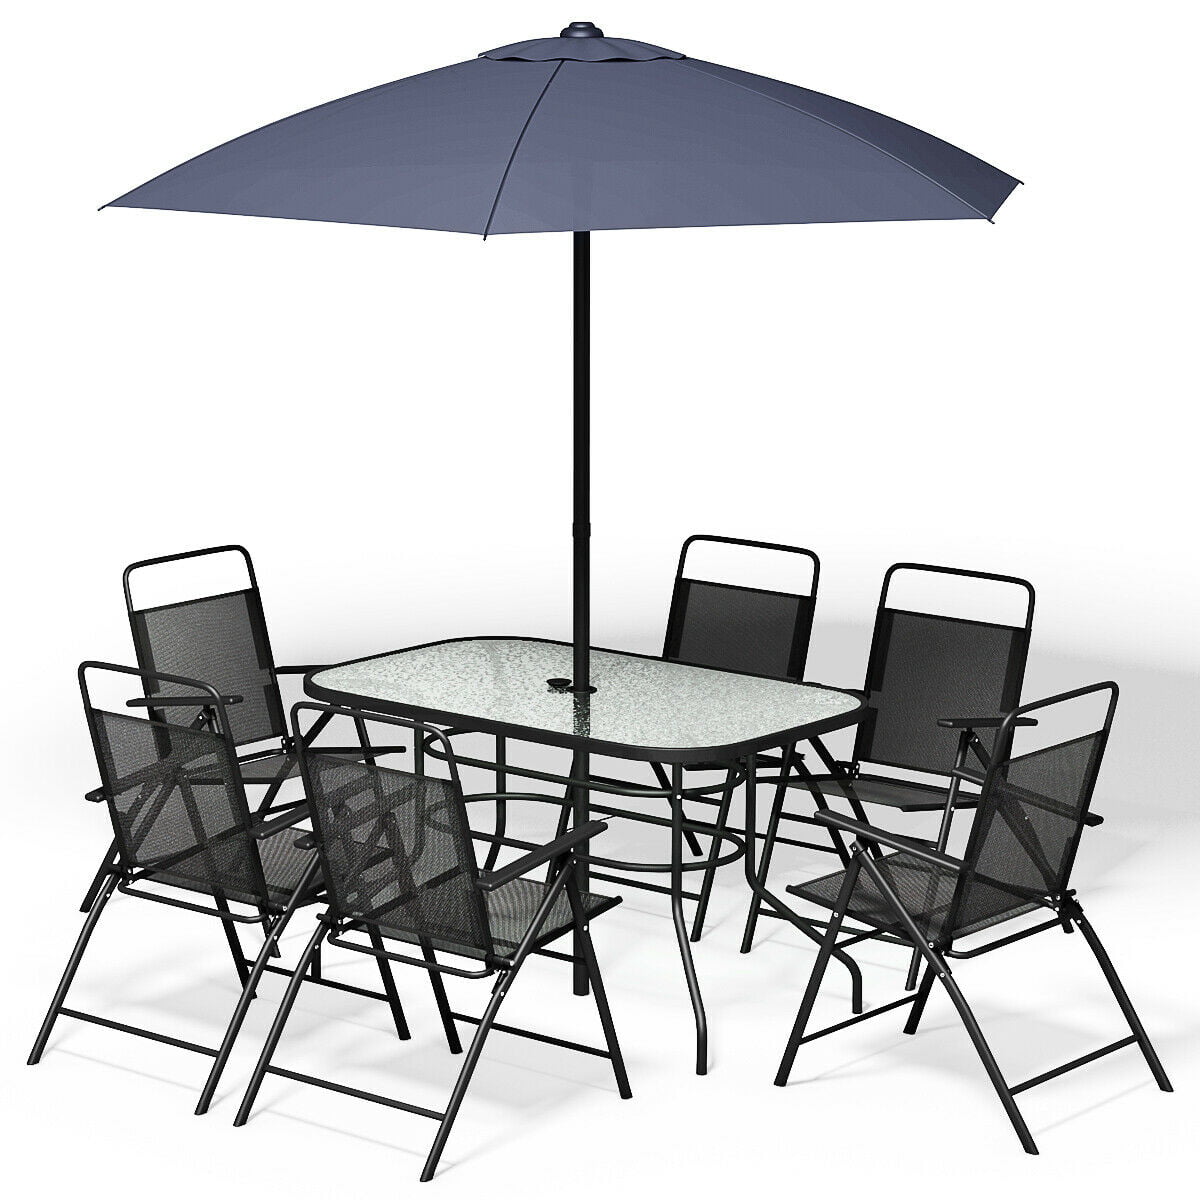 Furniture 6 Folding Chairs Table, Metal Outdoor Table And Chairs With Umbrella